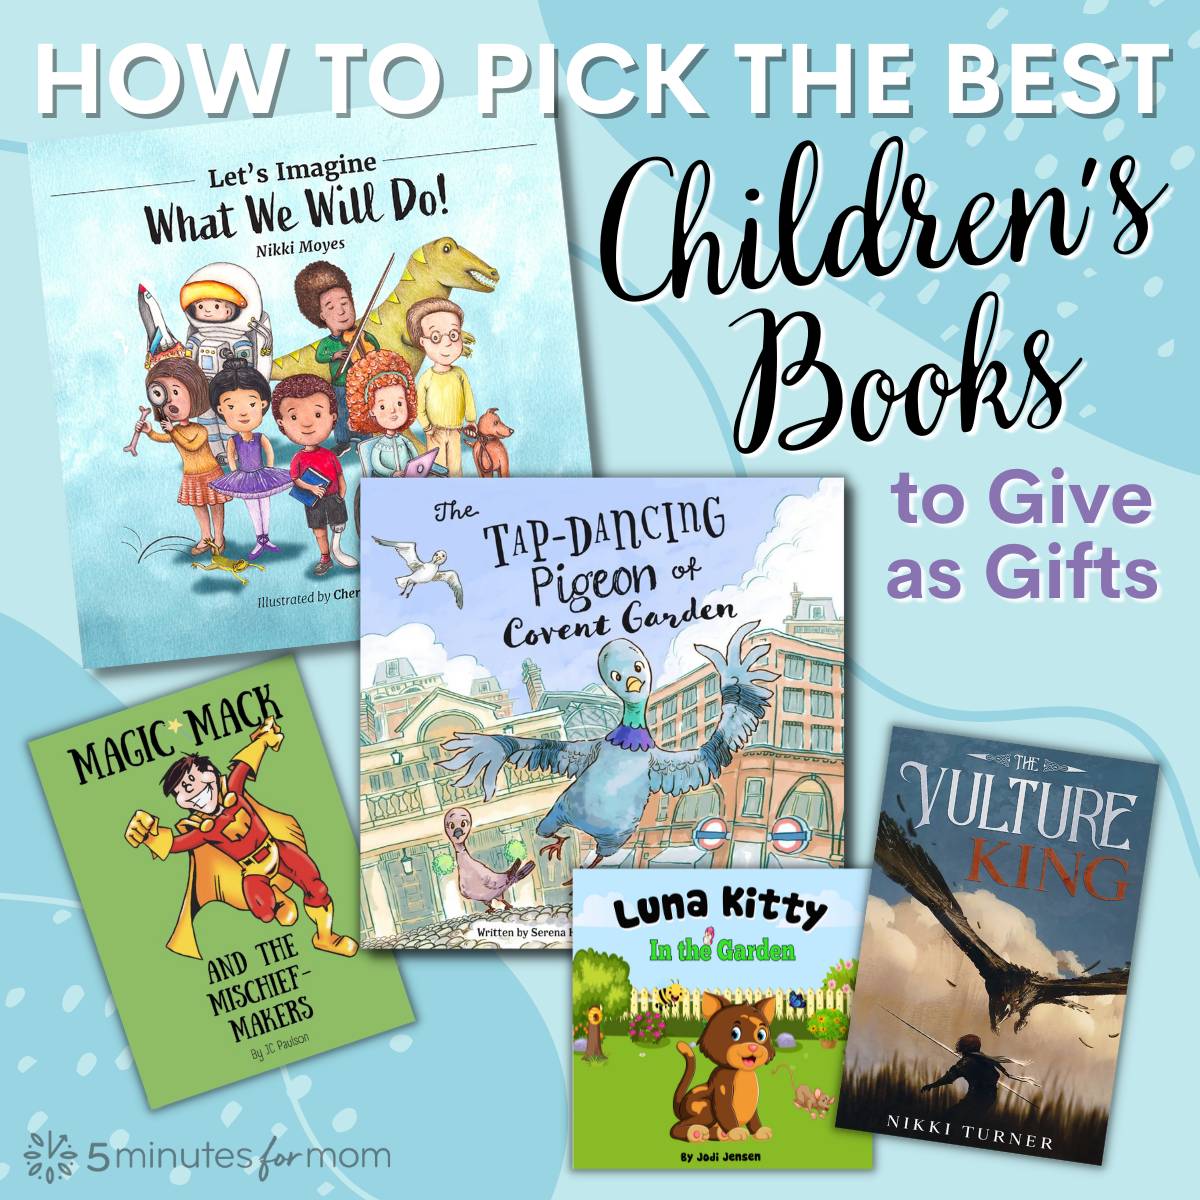 How to Pick the Best Childrens Books to Give as Gifts meme